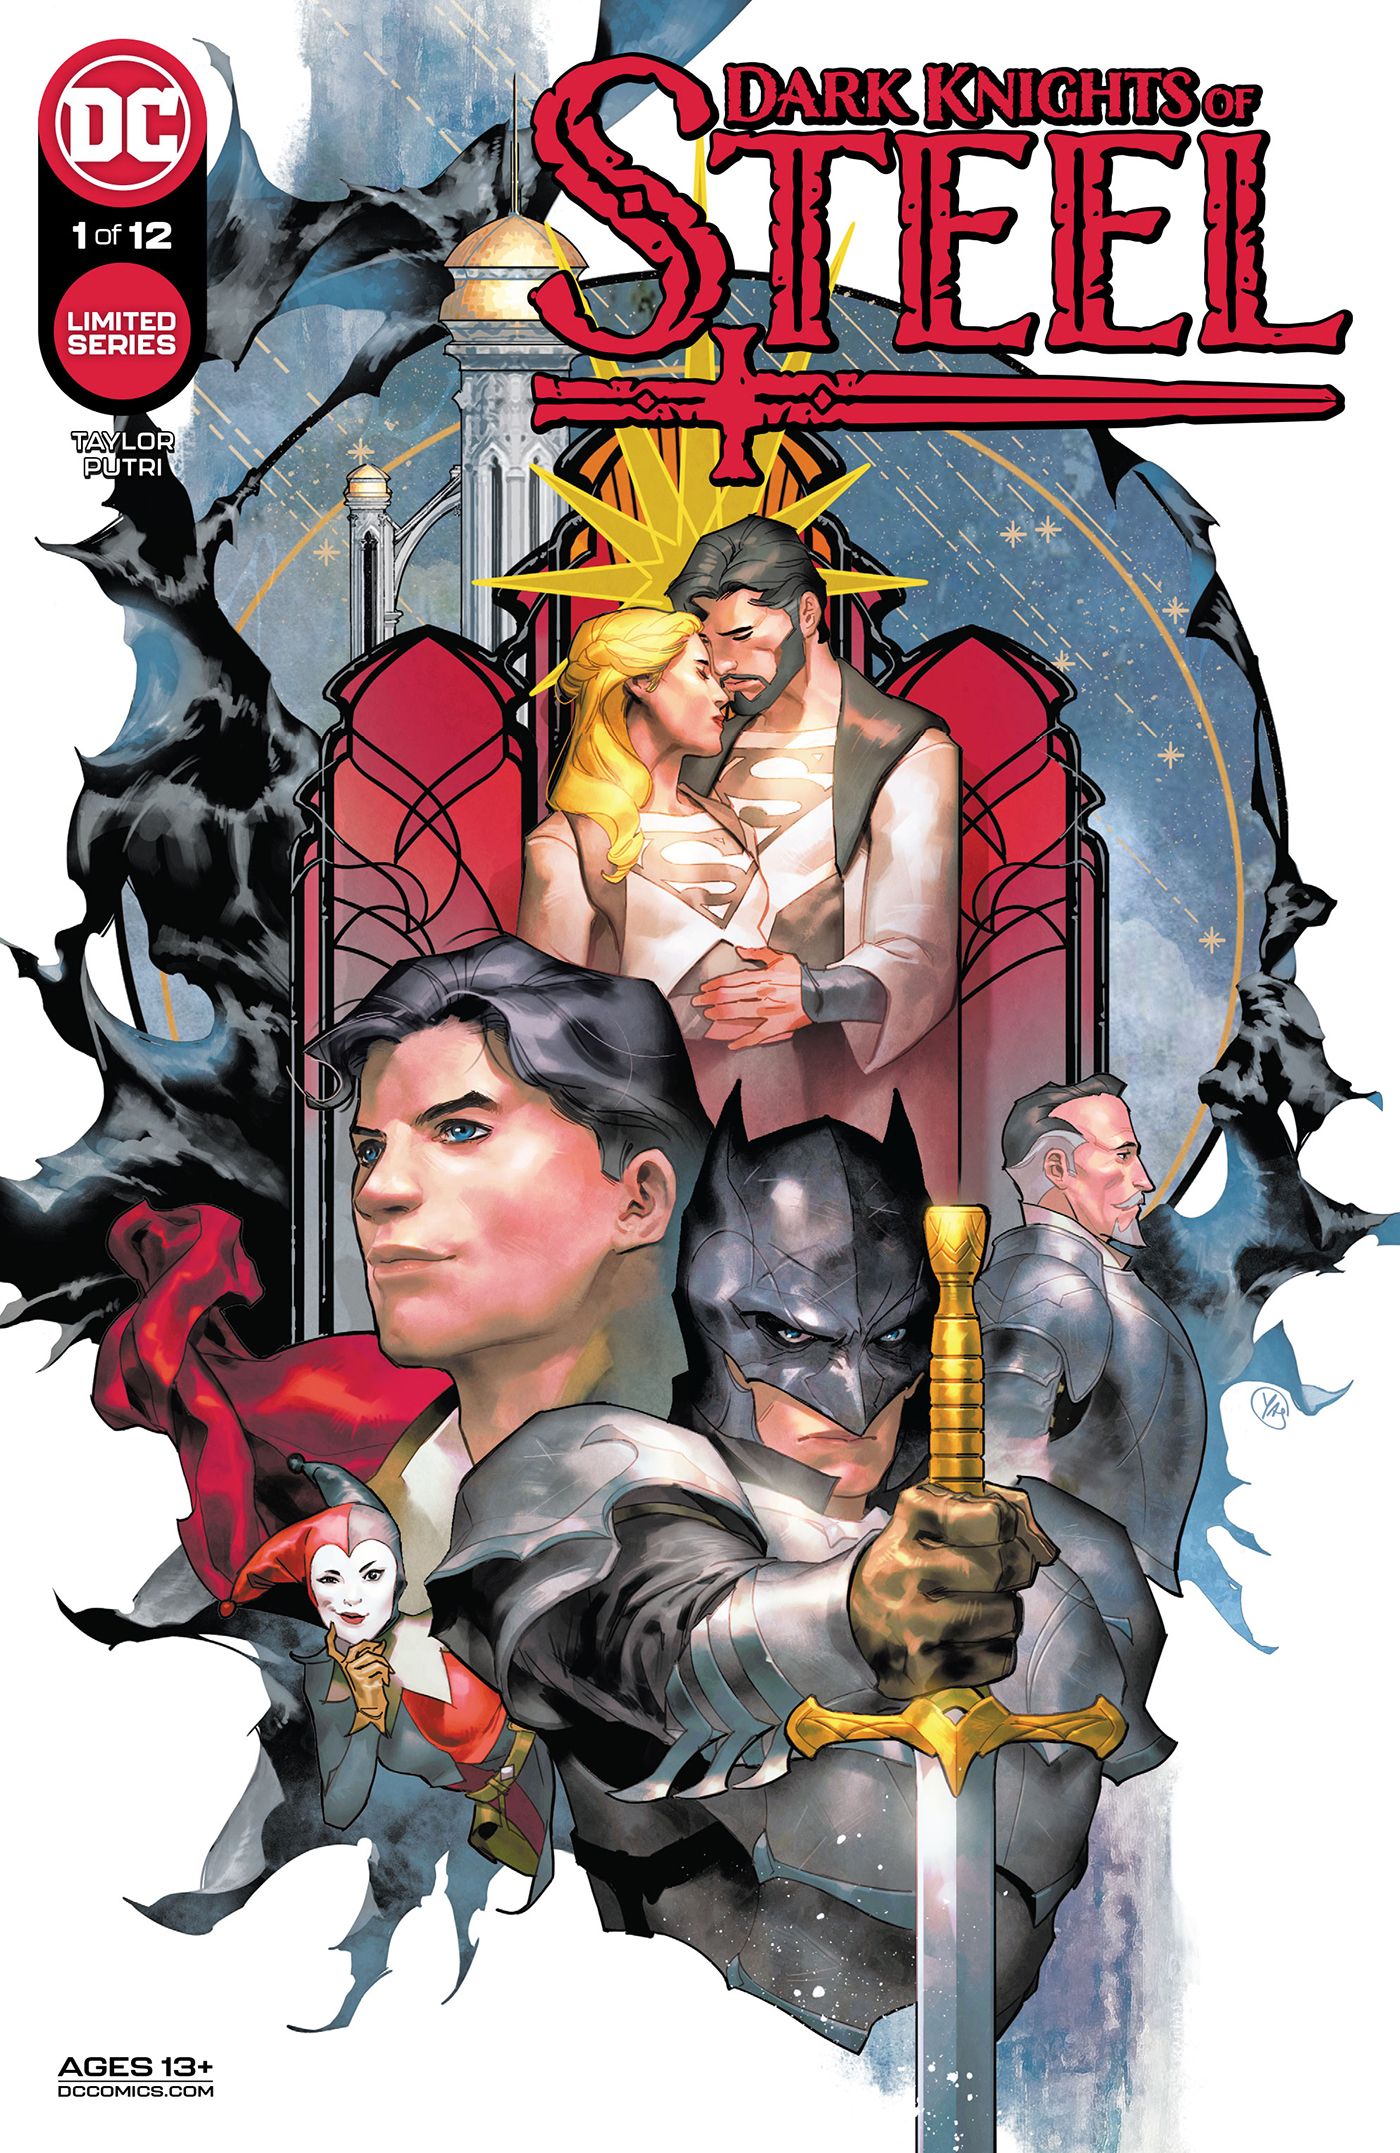 The main cover for Dark Knights of Steel features Superman, his parents, Batman and more.